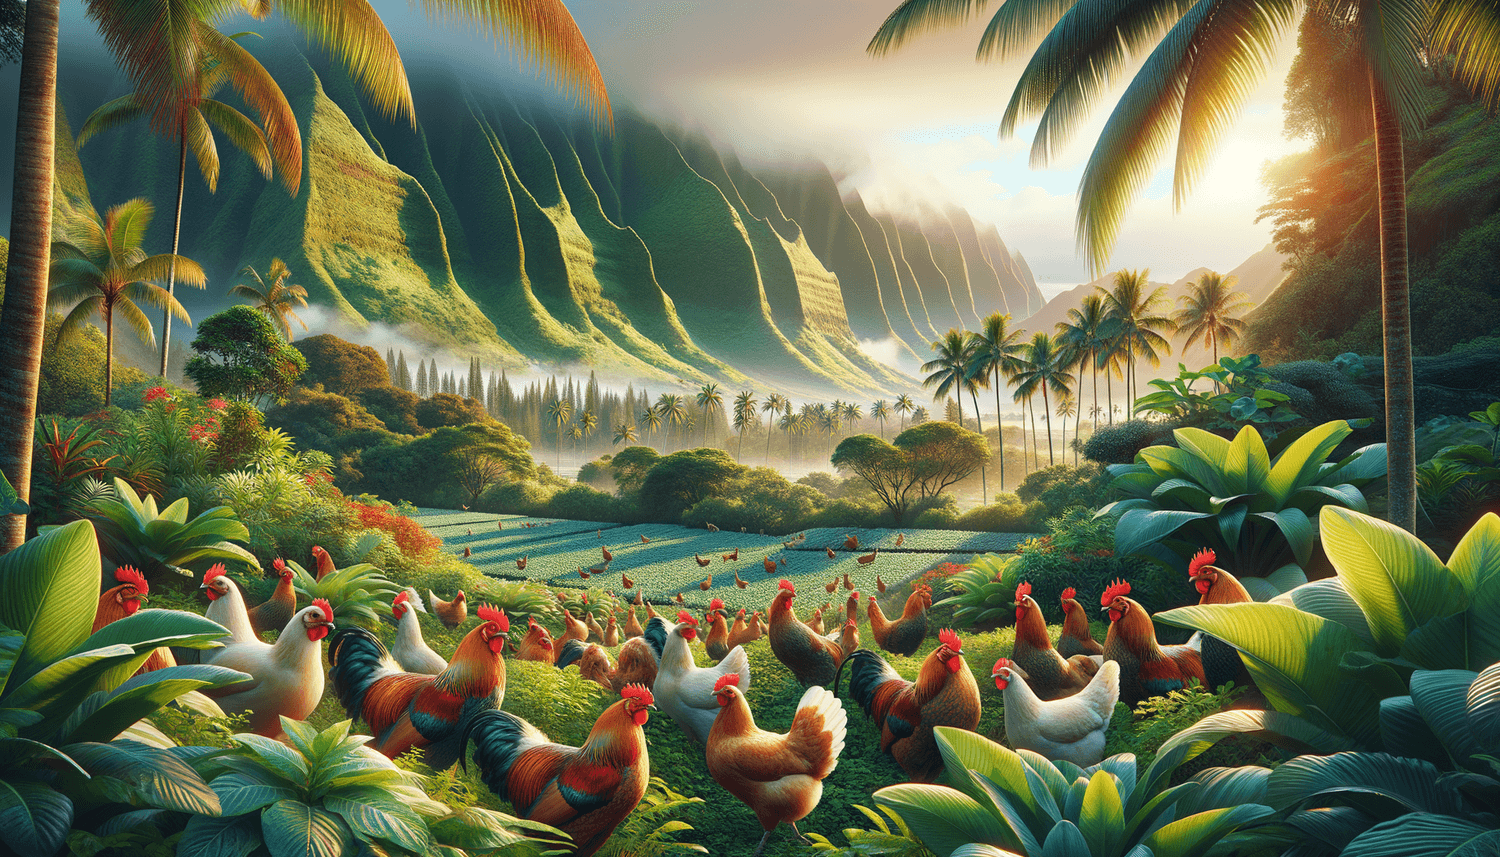 Why Are There So Many Chickens in Hawaii?